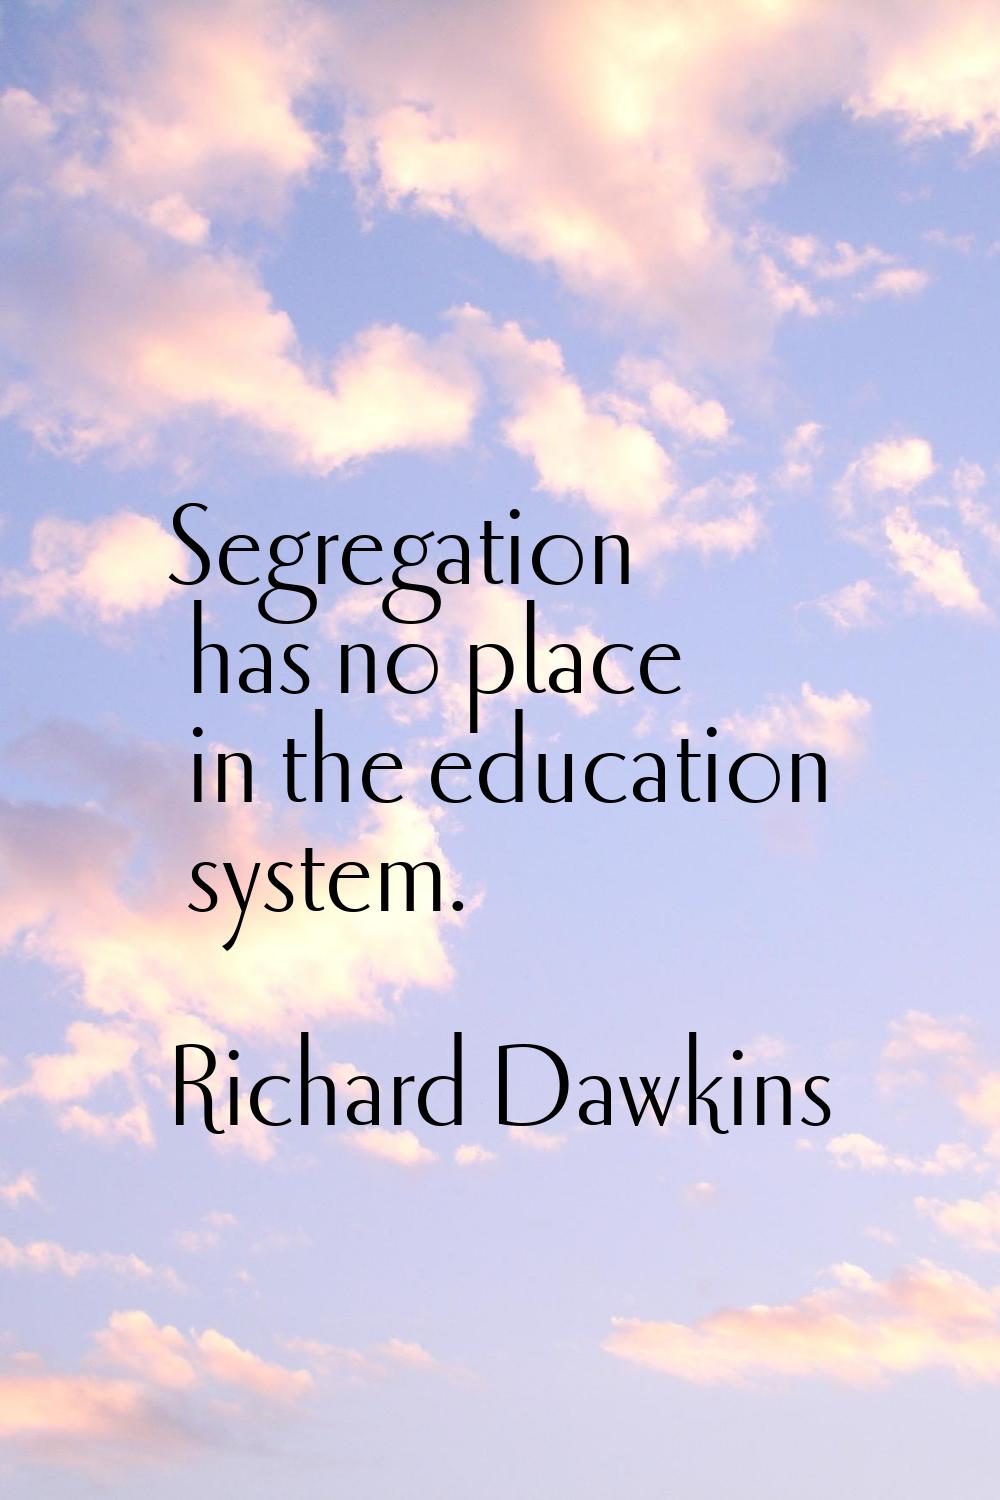 Segregation has no place in the education system.